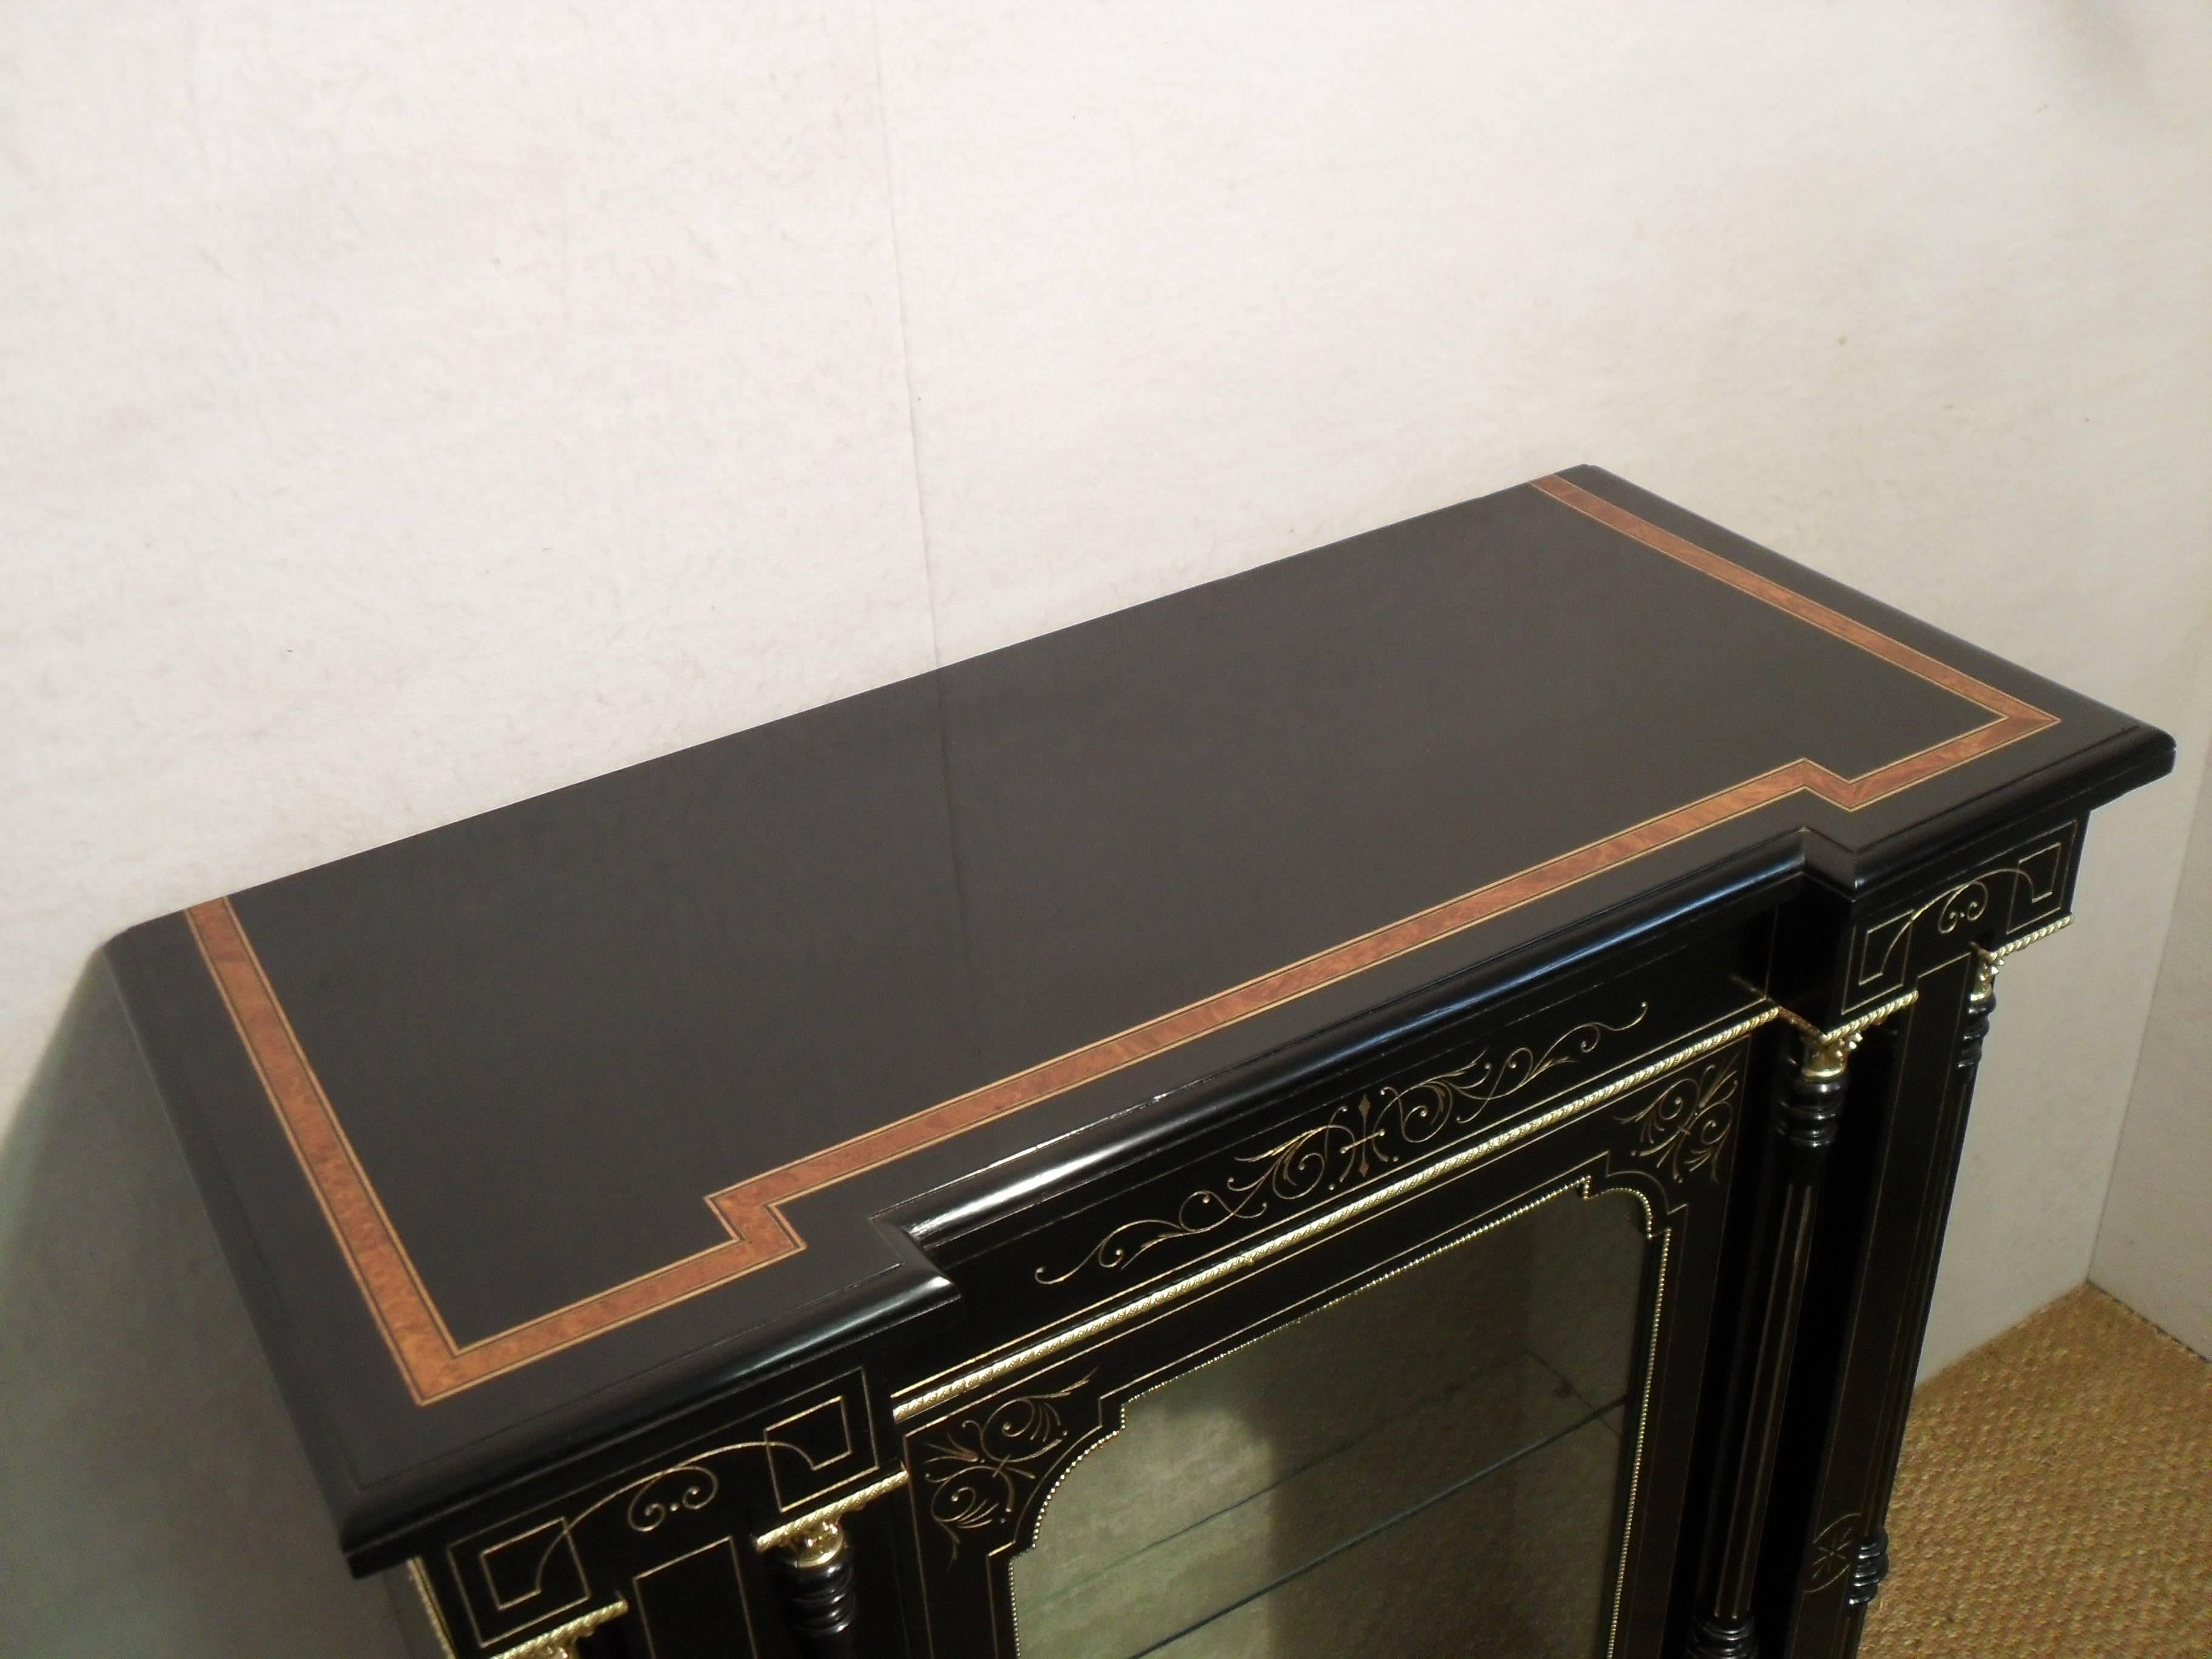 Gilt Pair of Victorian Aesthetic Movement Ebonized Display Cabinets or Bookcases